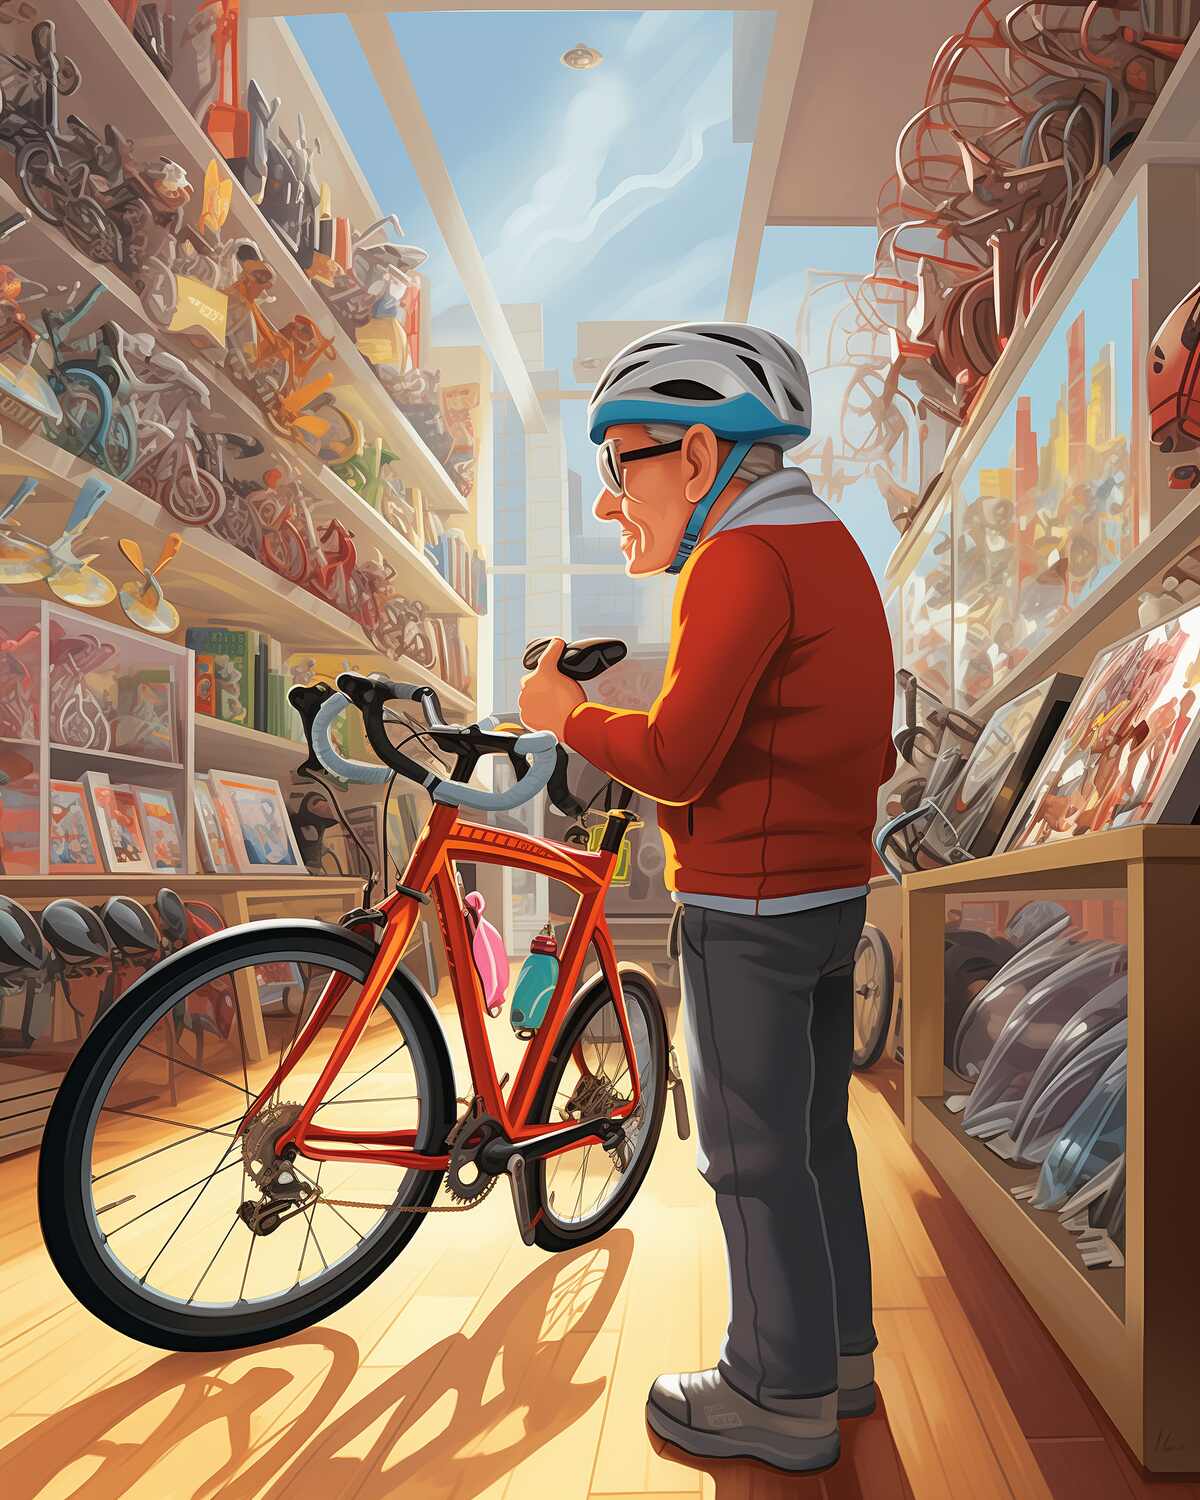 A cartoon of an old man cyclist in a toy store looking at toy cycles.